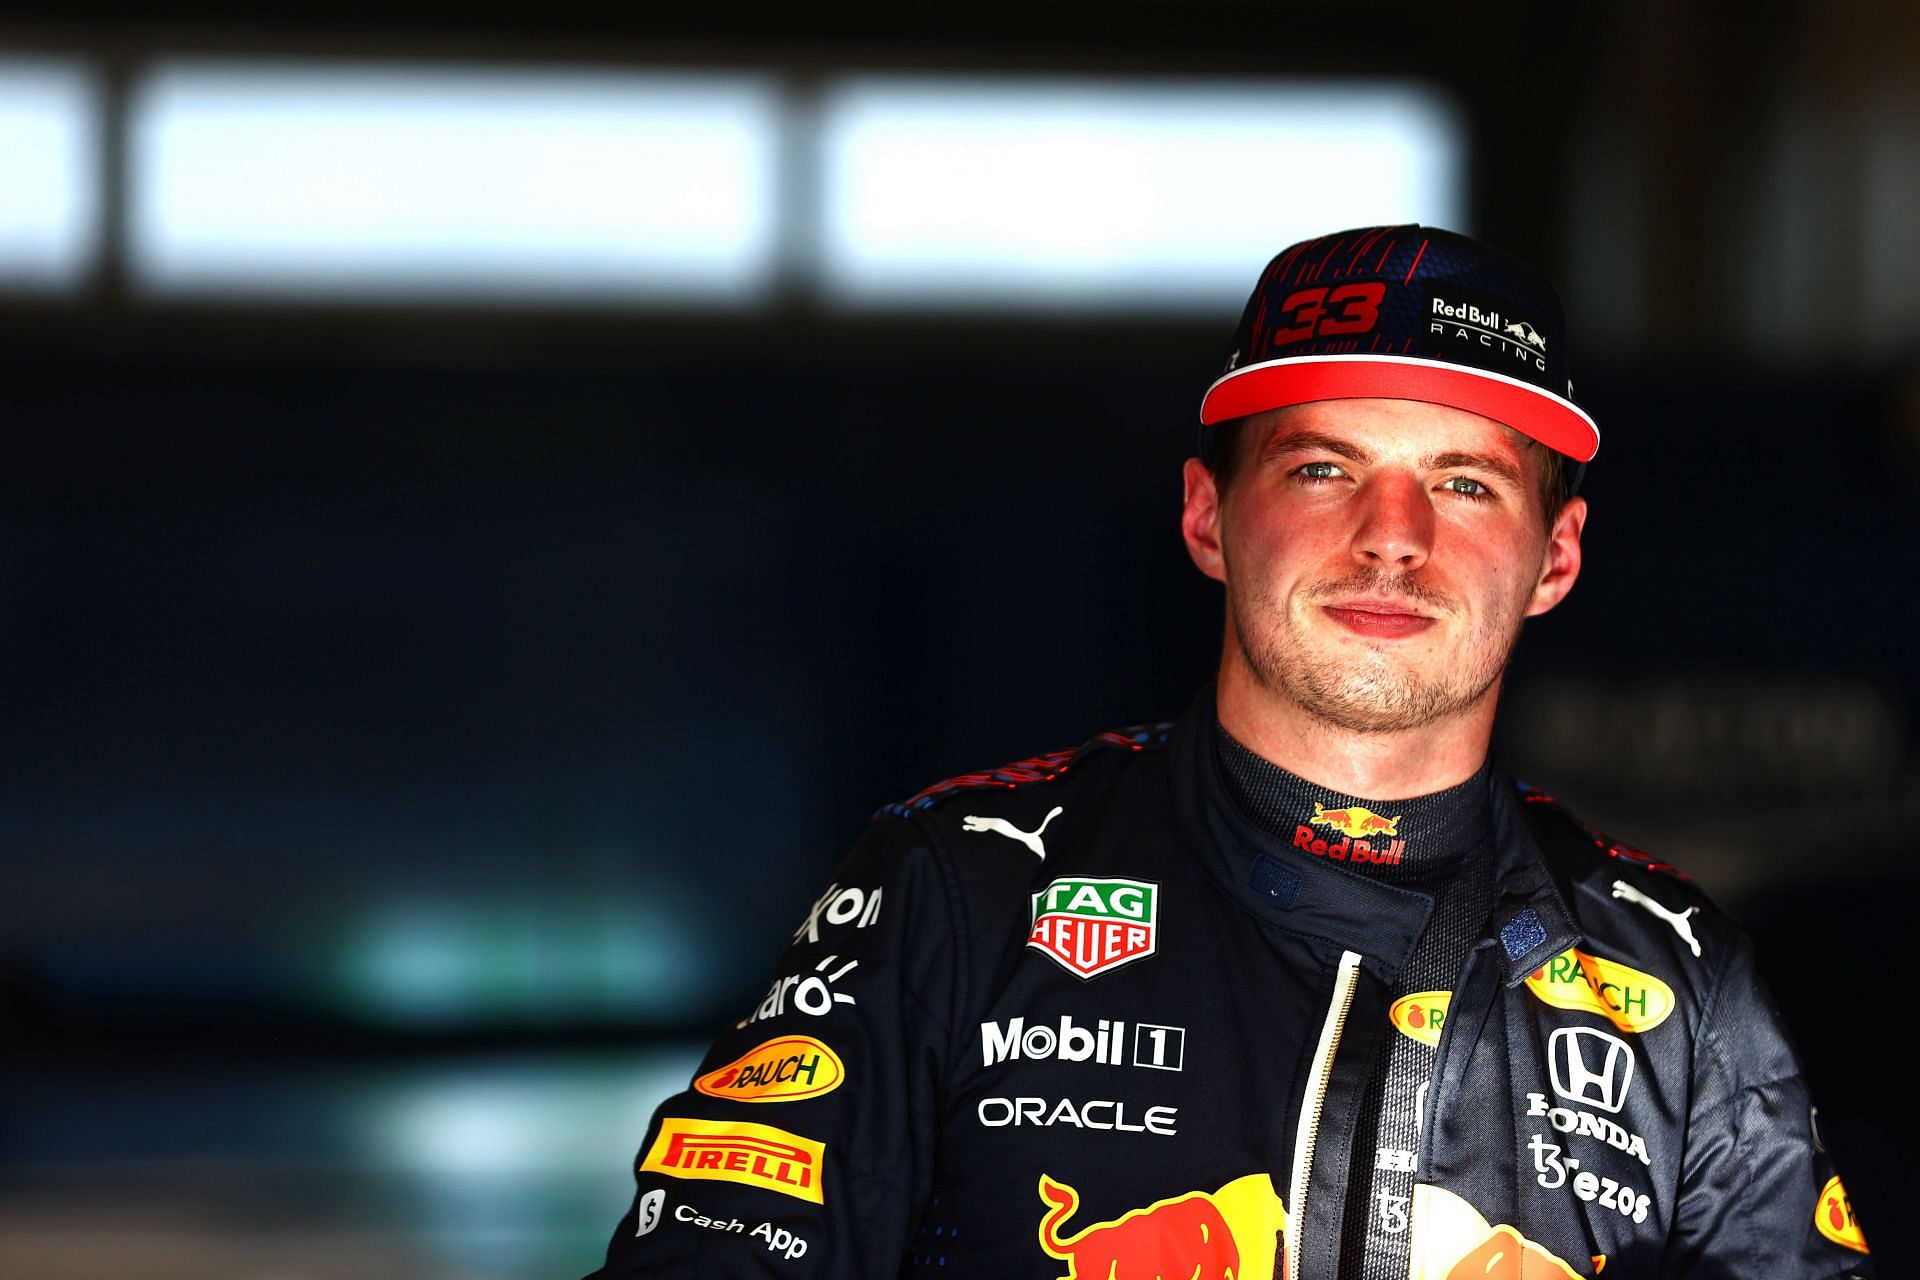 Pole position qualifier Max Verstappen of Red Bull Racing looks on in parc ferme during qualifying ahead of the 2021 USGP in Austin, Texas. (Photo by Mark Thompson/Getty Images)